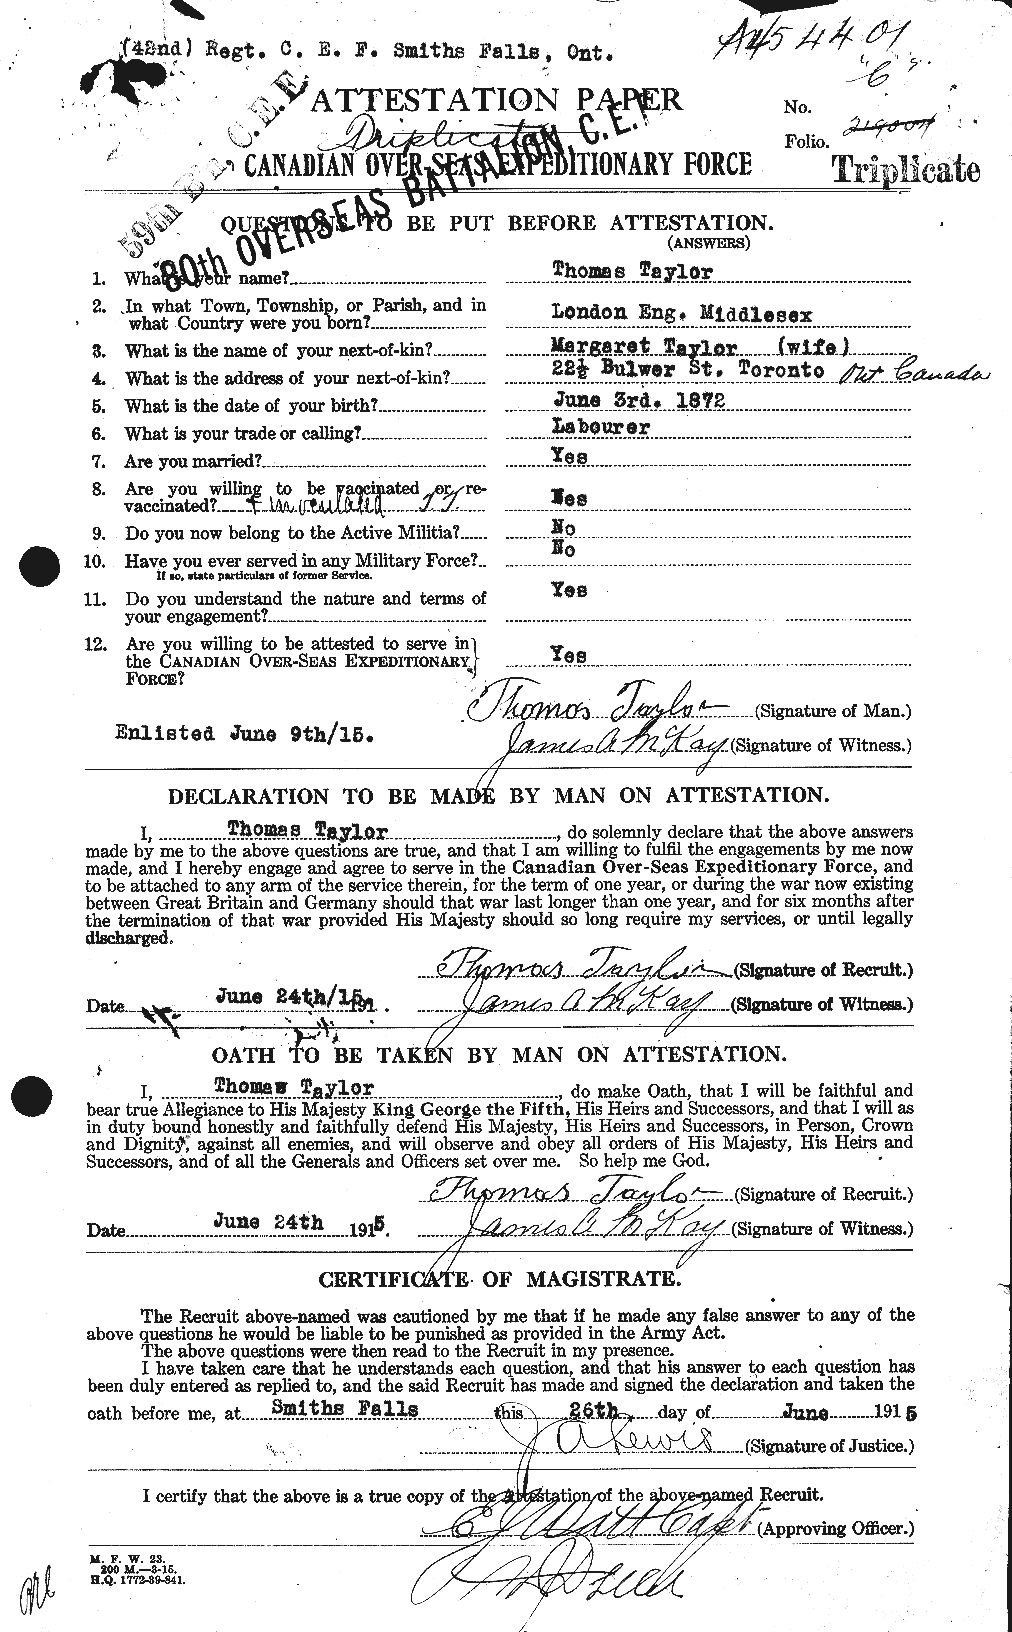 Personnel Records of the First World War - CEF 627944a